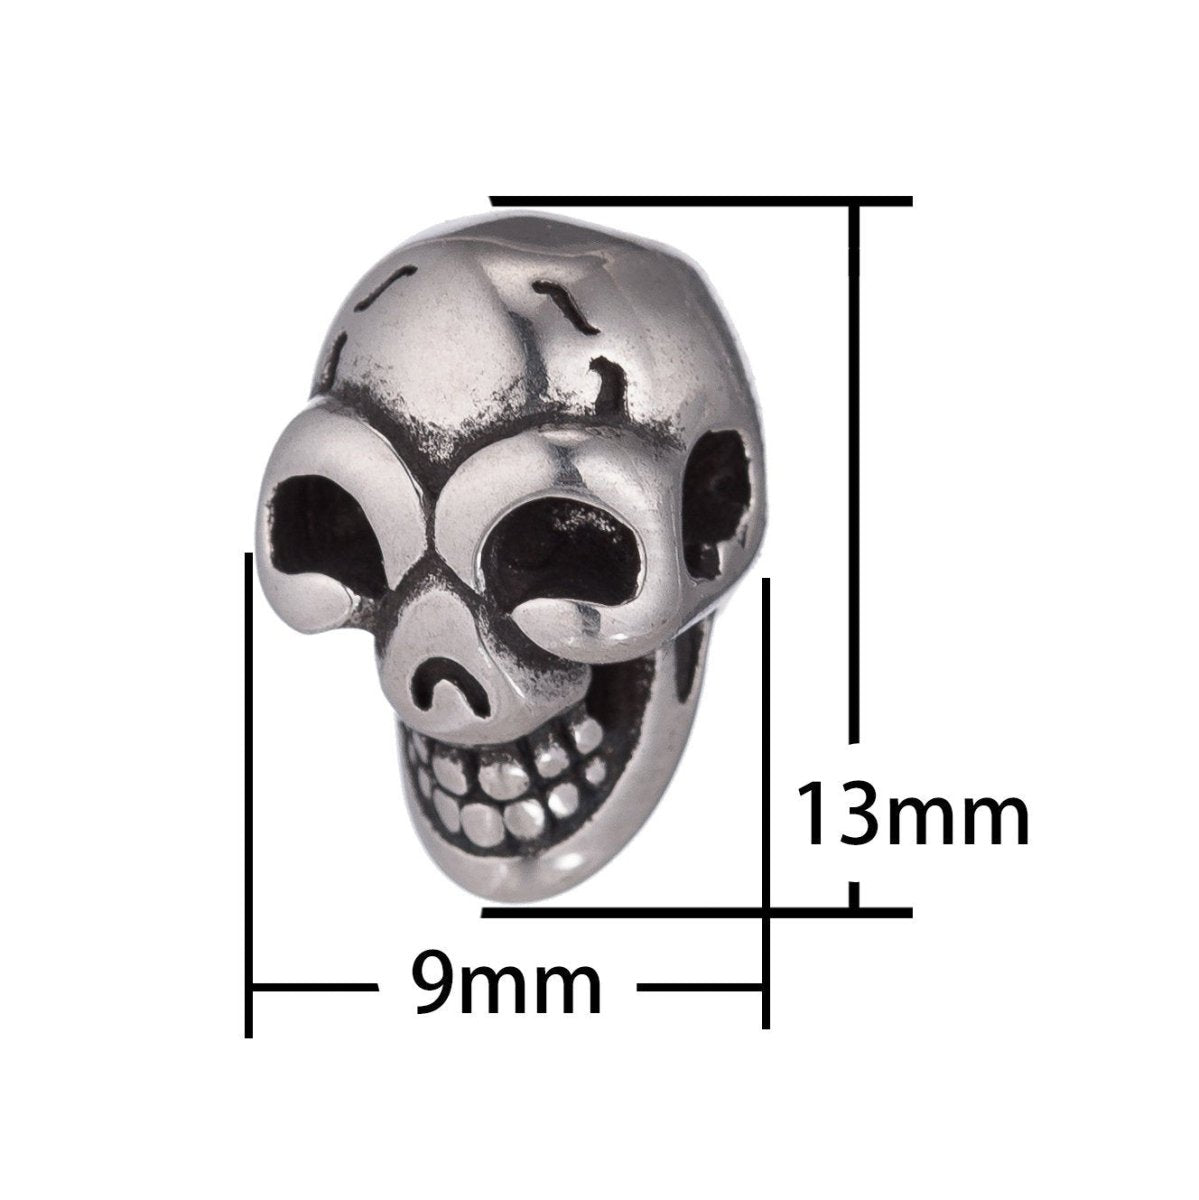 1pc Silver Stainless Steel 3D Smiling Skull Head, Scary, Halloween Season, Bracelet Charm Bead Finding Connector Spacer for Jewelry Making, 091318-7343 - DLUXCA